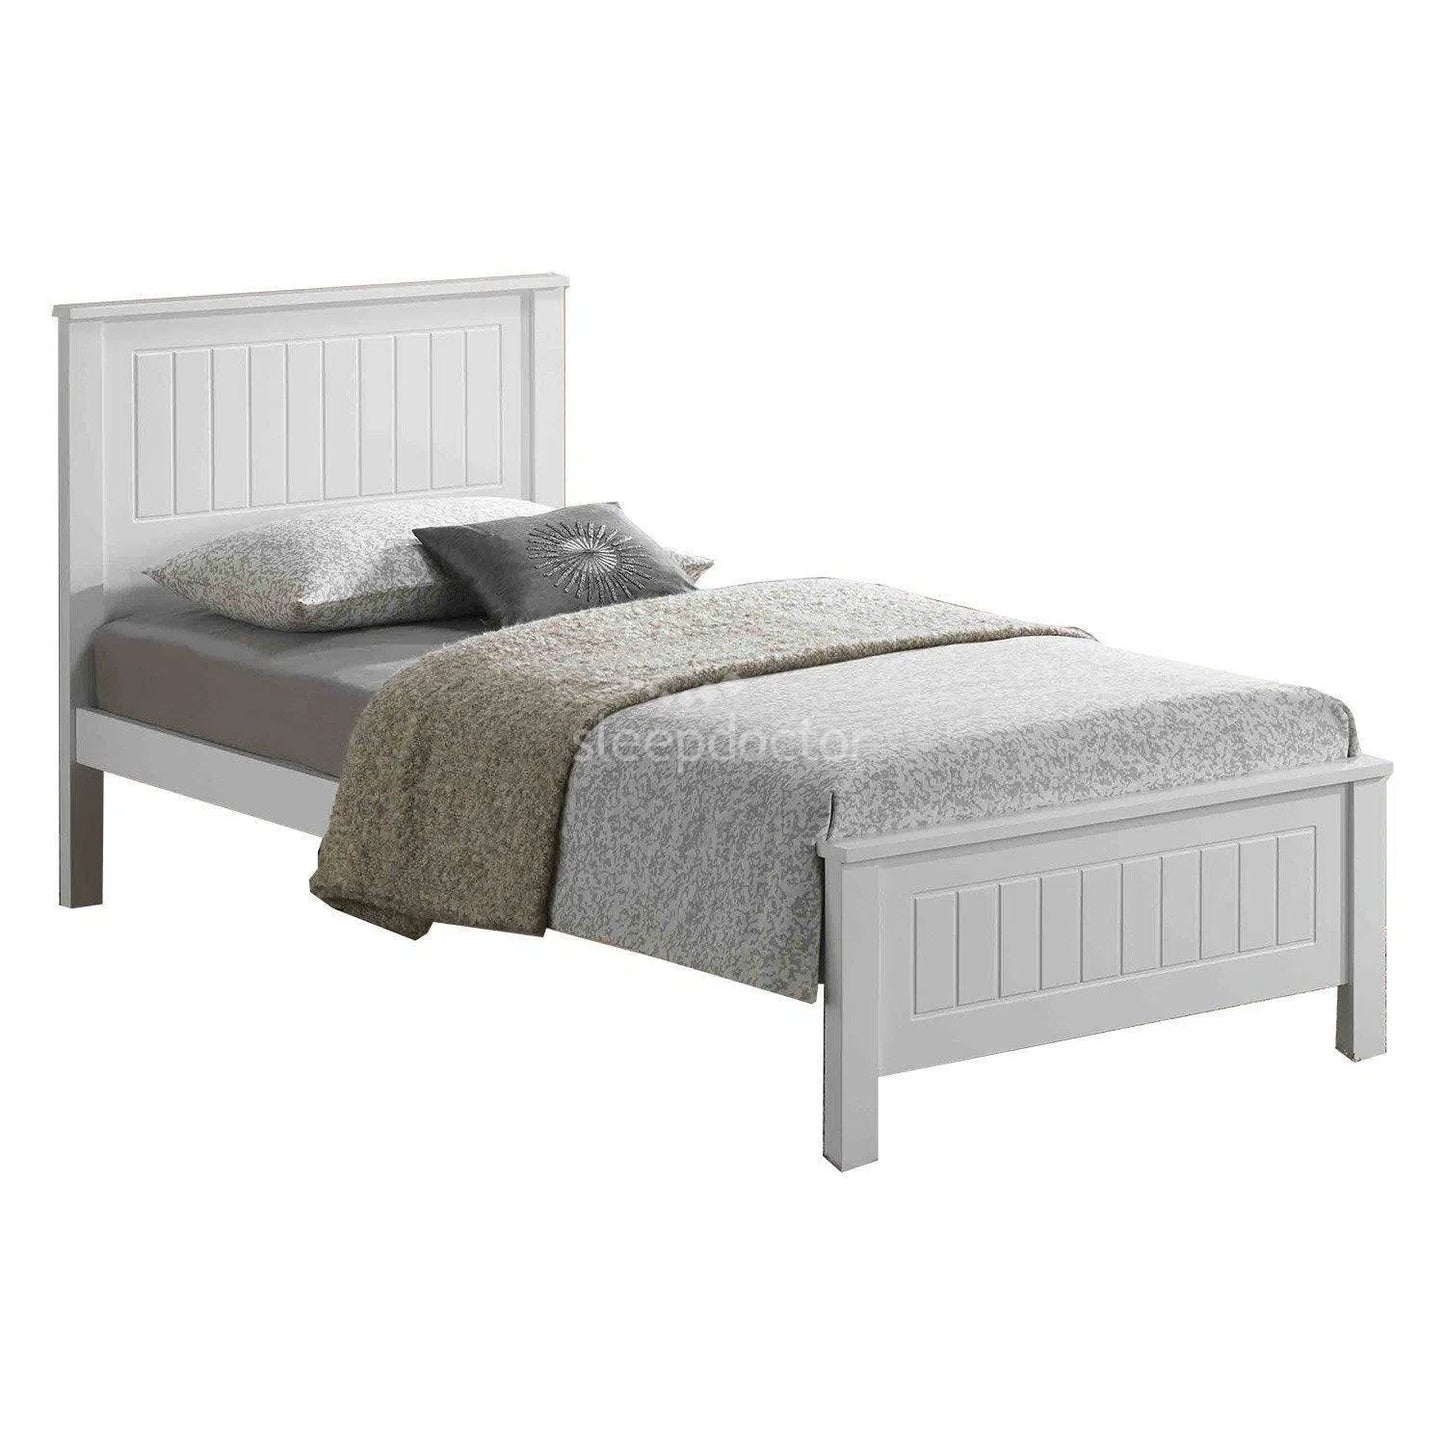 Quincy Hamptons Style Bed in White-Sleep Doctor